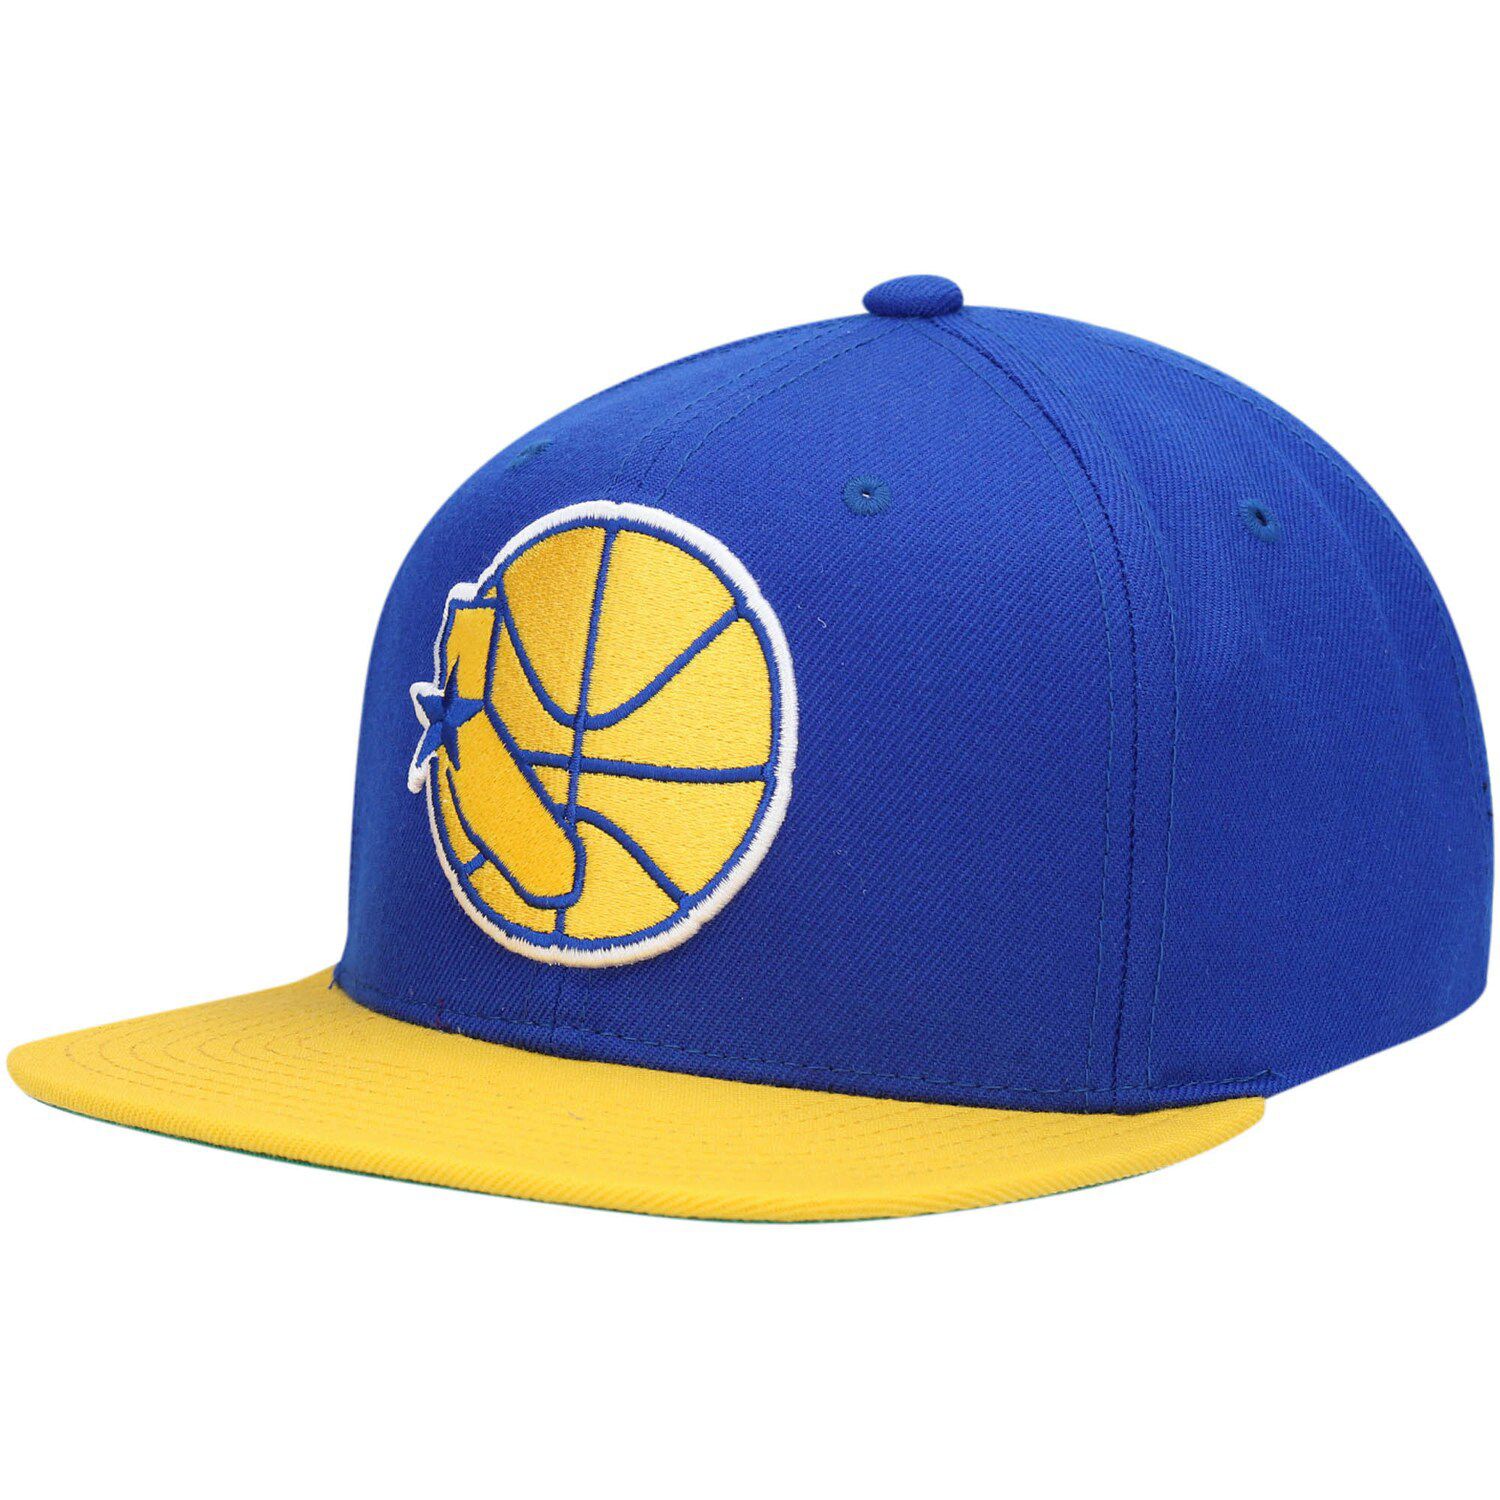 Image for Unbranded Men's Mitchell & Ness Royal/Gold Golden State Warriors 2-Tone Snapback Hat at Kohl's.